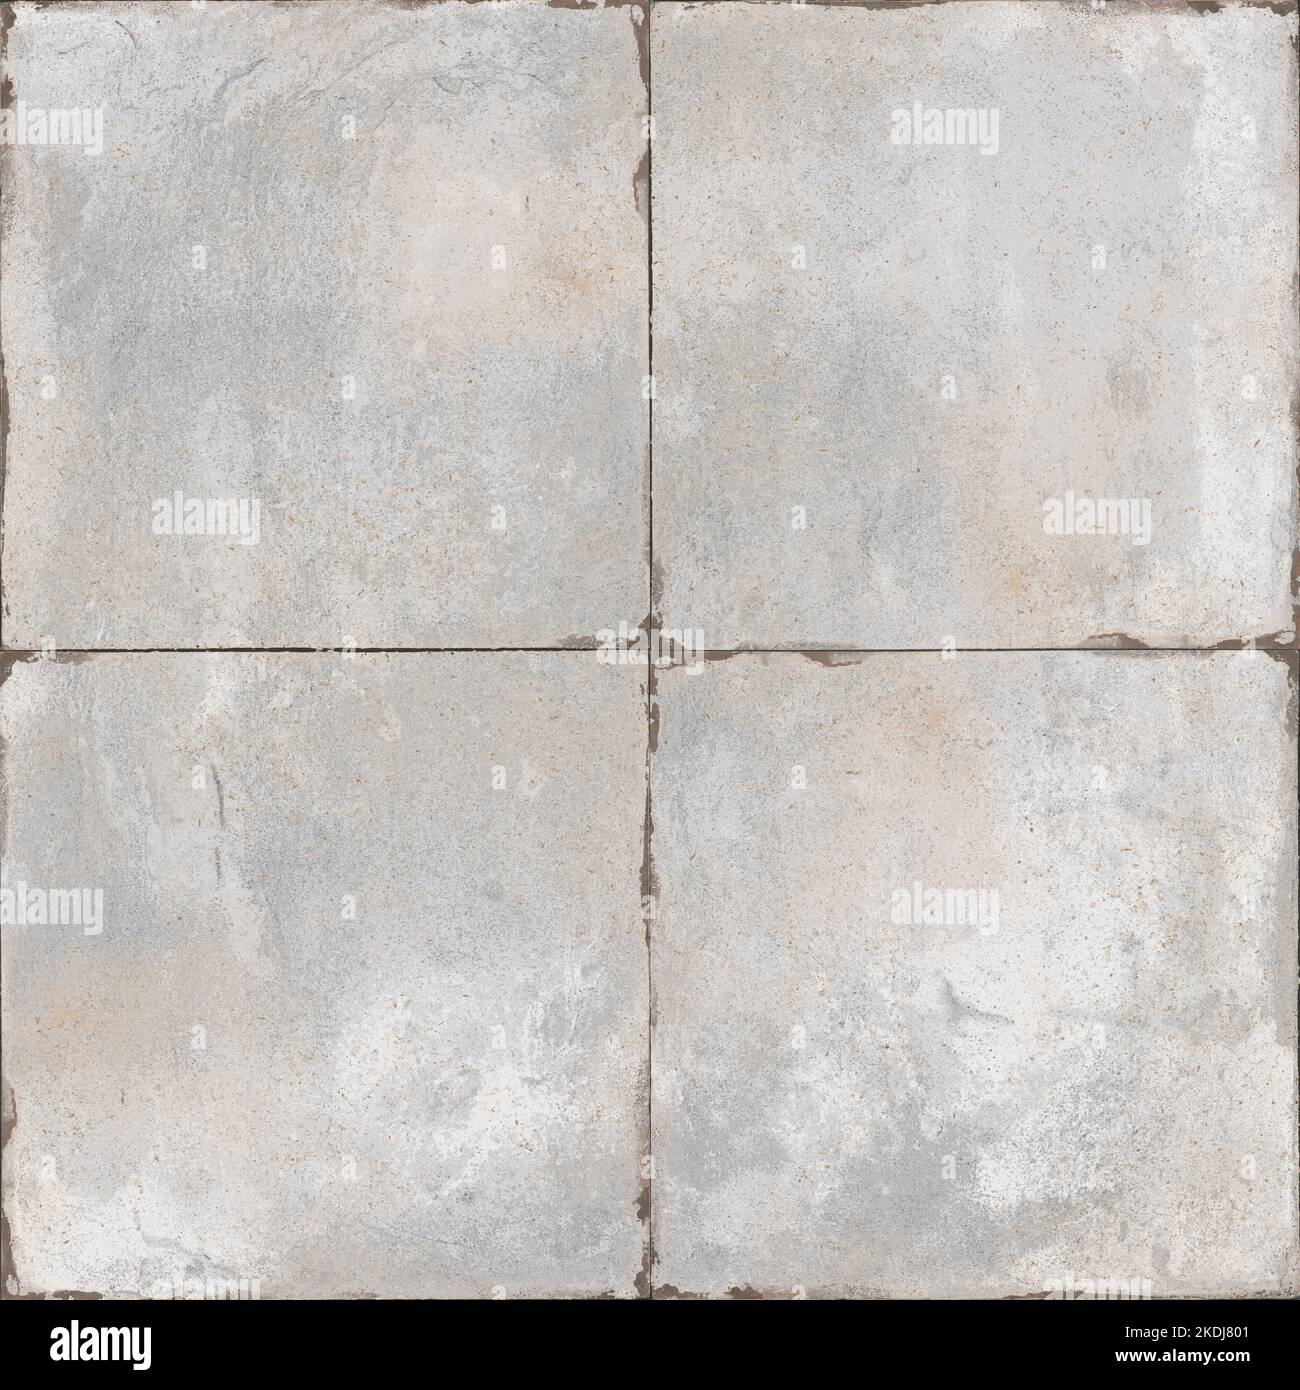 cement texture tile background Stock Photo